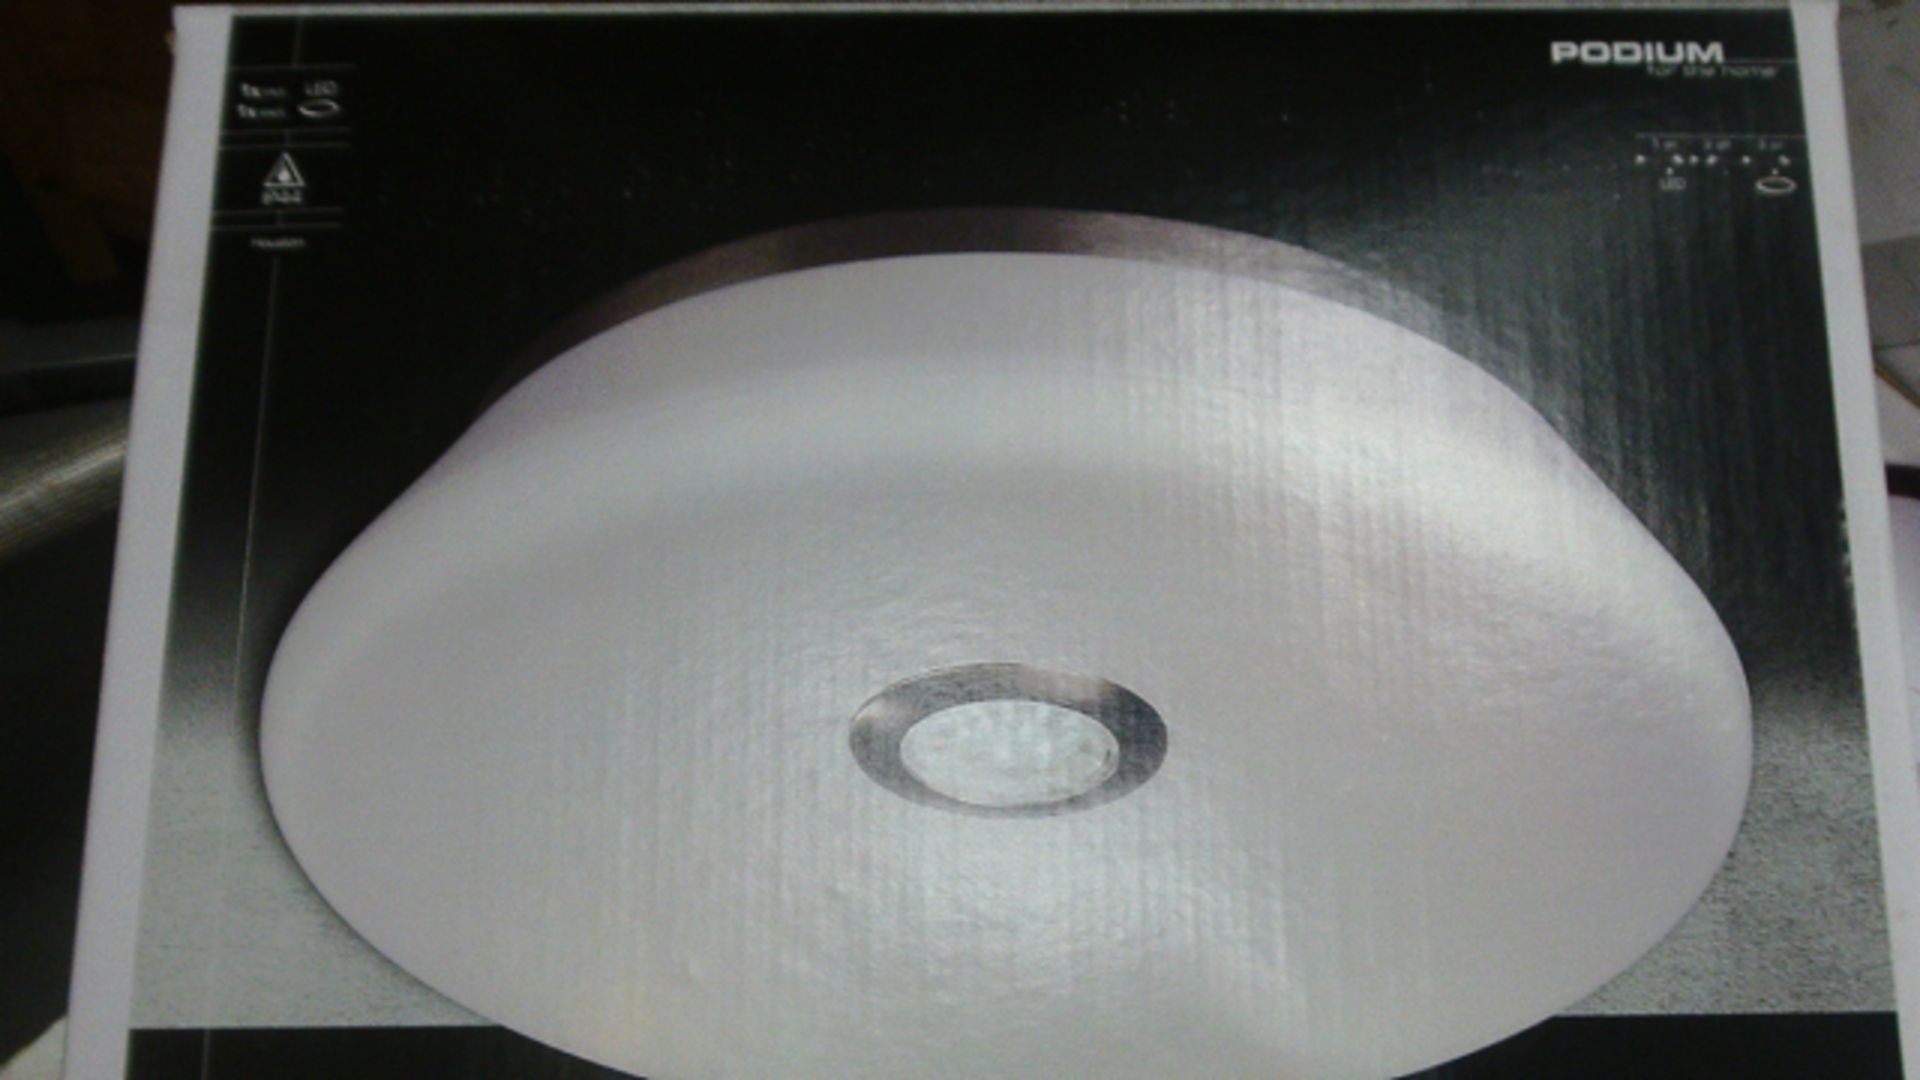 1pc x Brand new Philips Podium Houston Bathroom ceiling light - IP 44 rated includes bulb - rrp £139 - Image 2 of 3